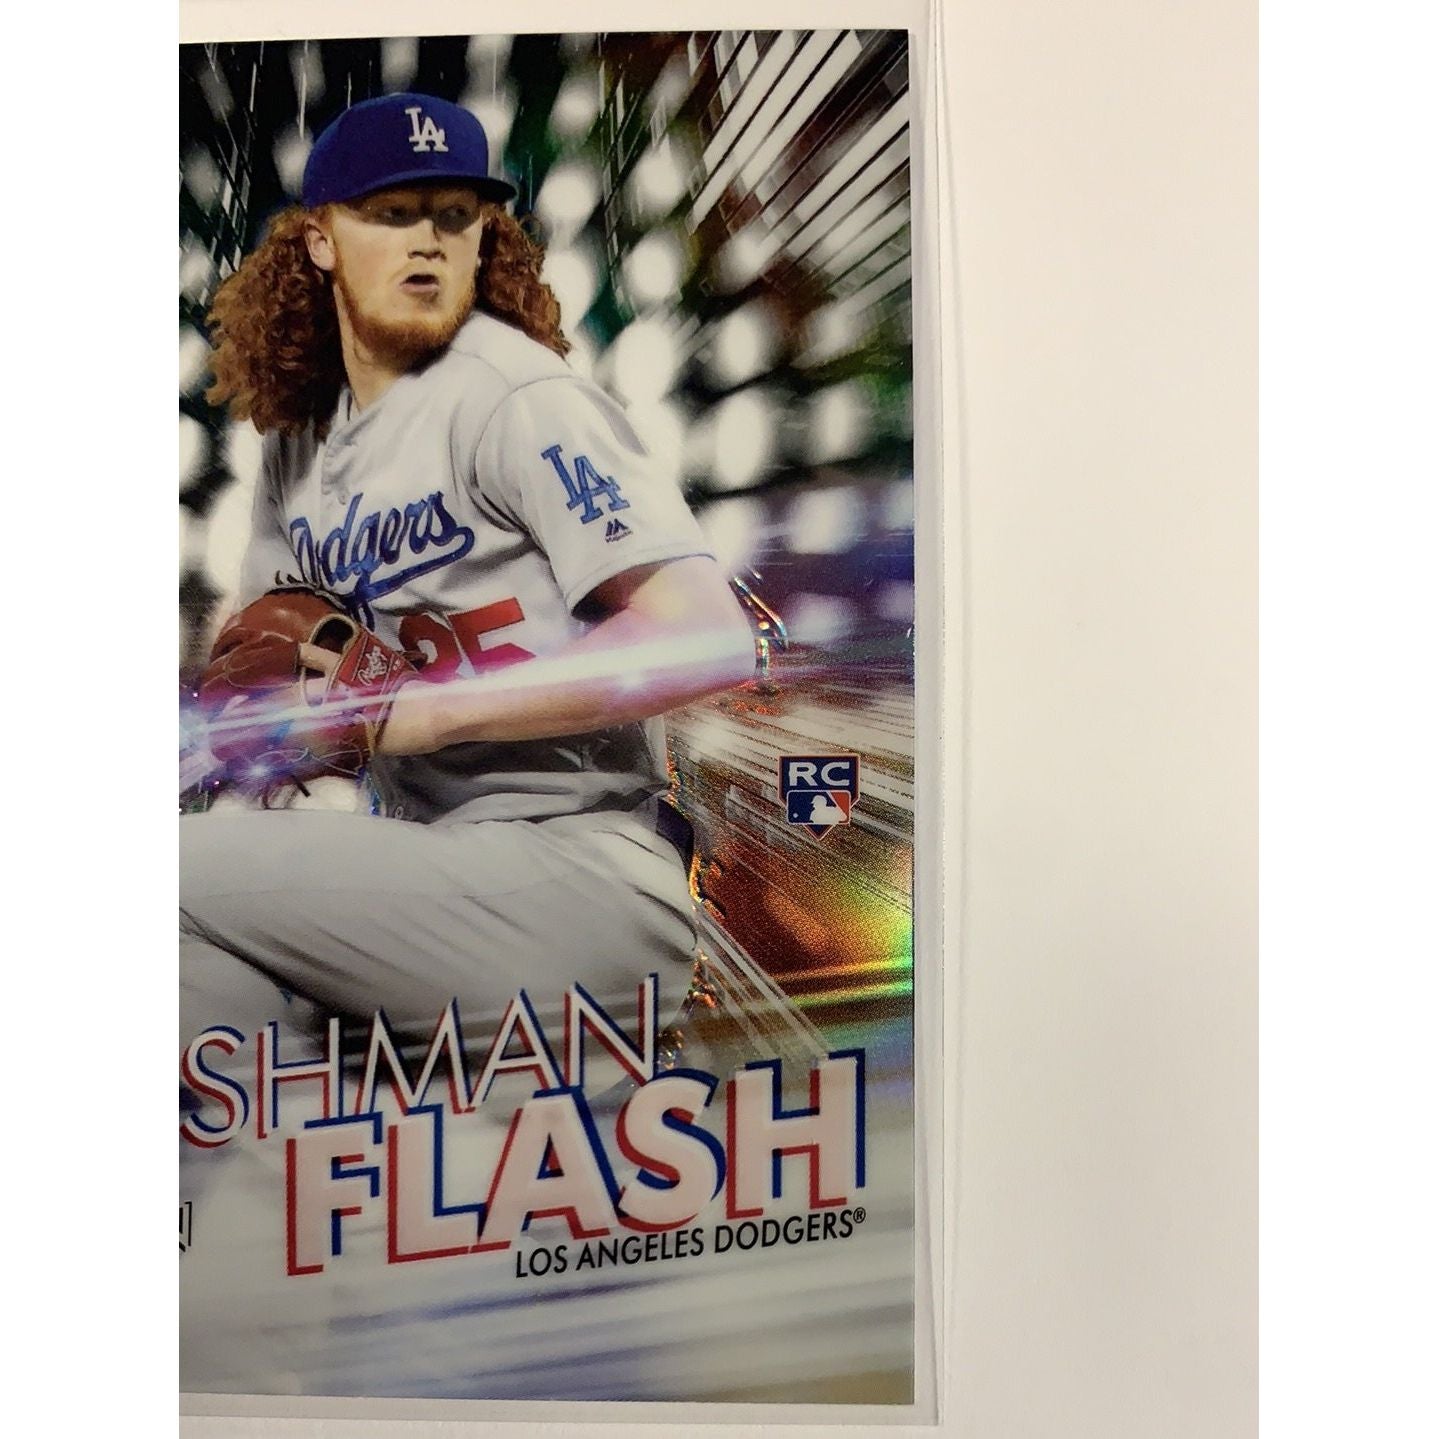  2020 Topps Chrome Dustin May Freshman Flash  Local Legends Cards & Collectibles